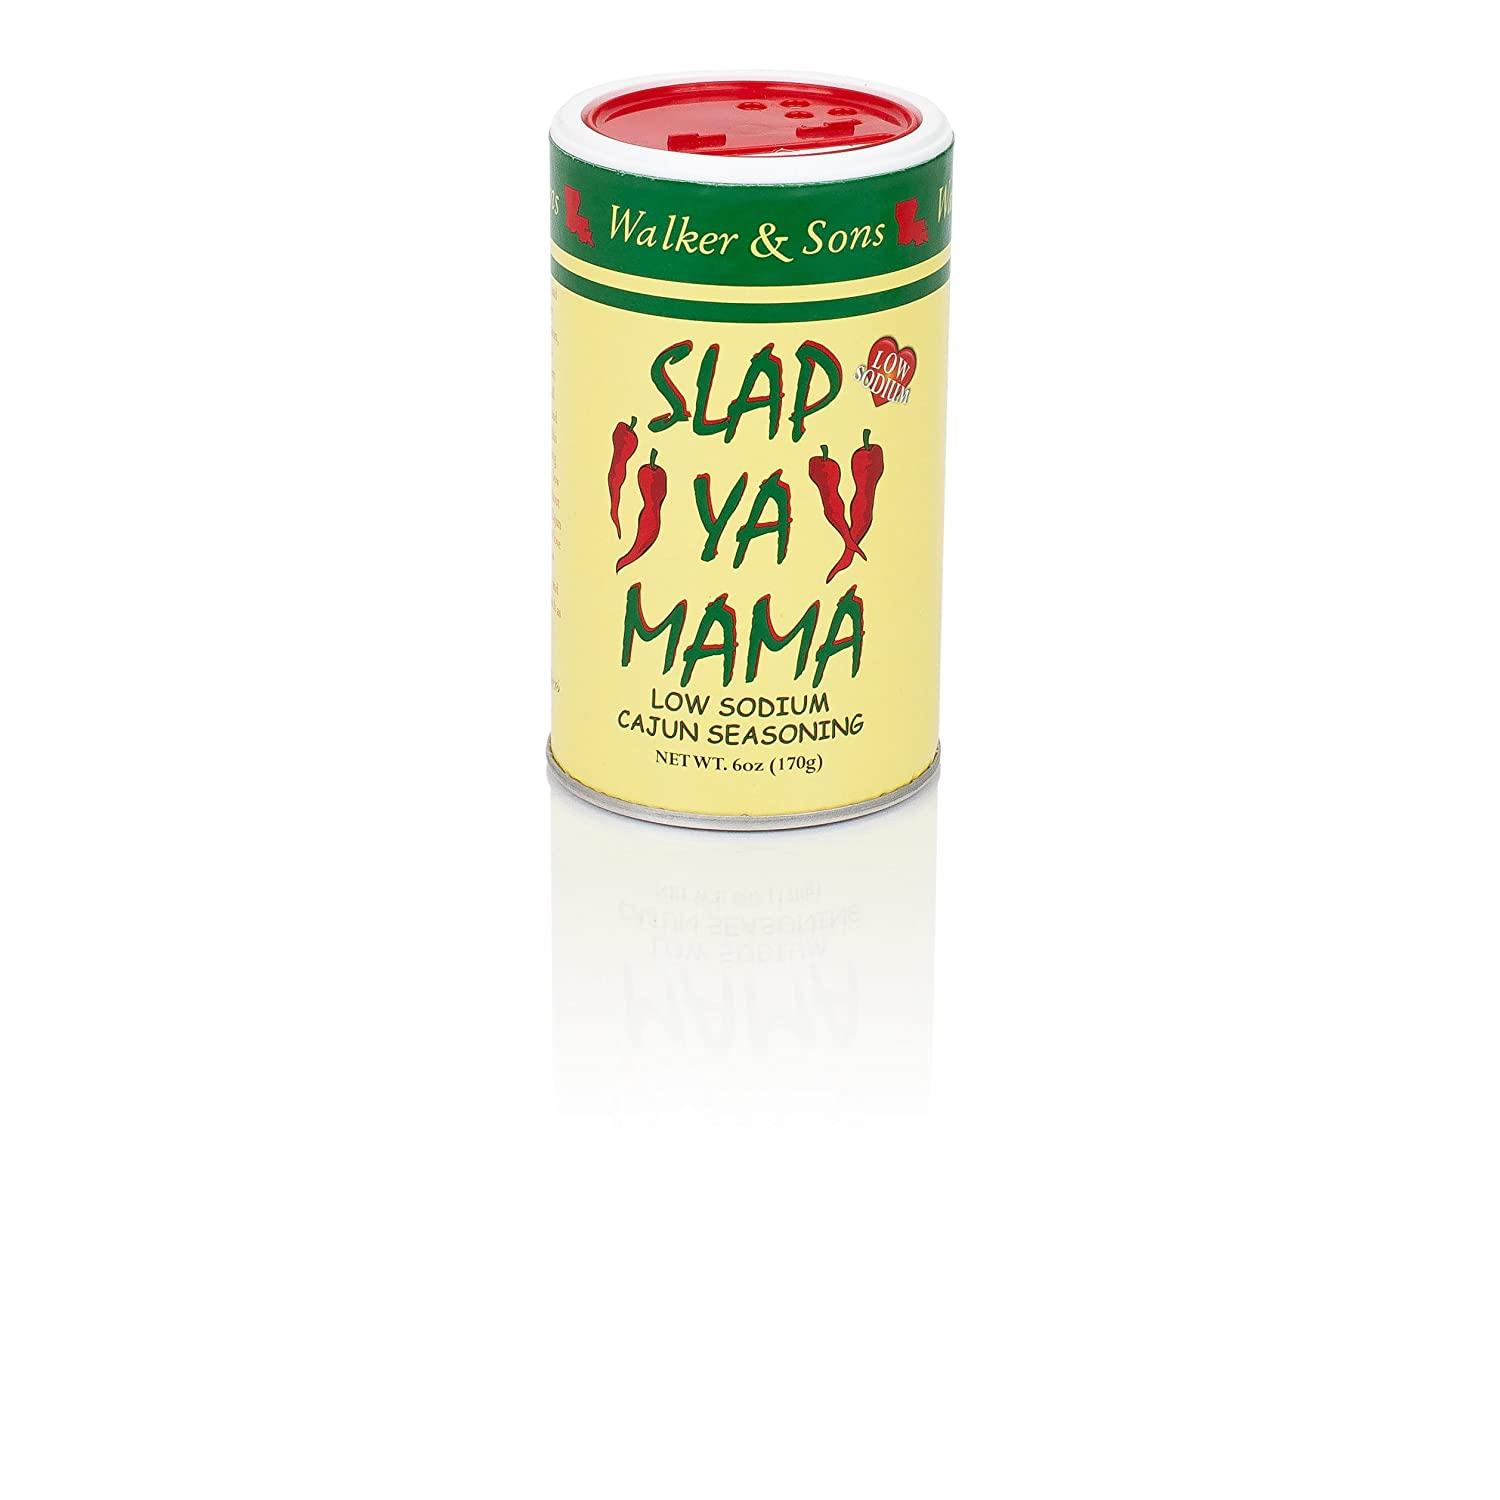 Slap Ya Mama All Natural Cajun Seasoning from Louisiana, Low Sodium Blend,  MSG Free and Kosher, 6 Ounce Can, Pack of 3